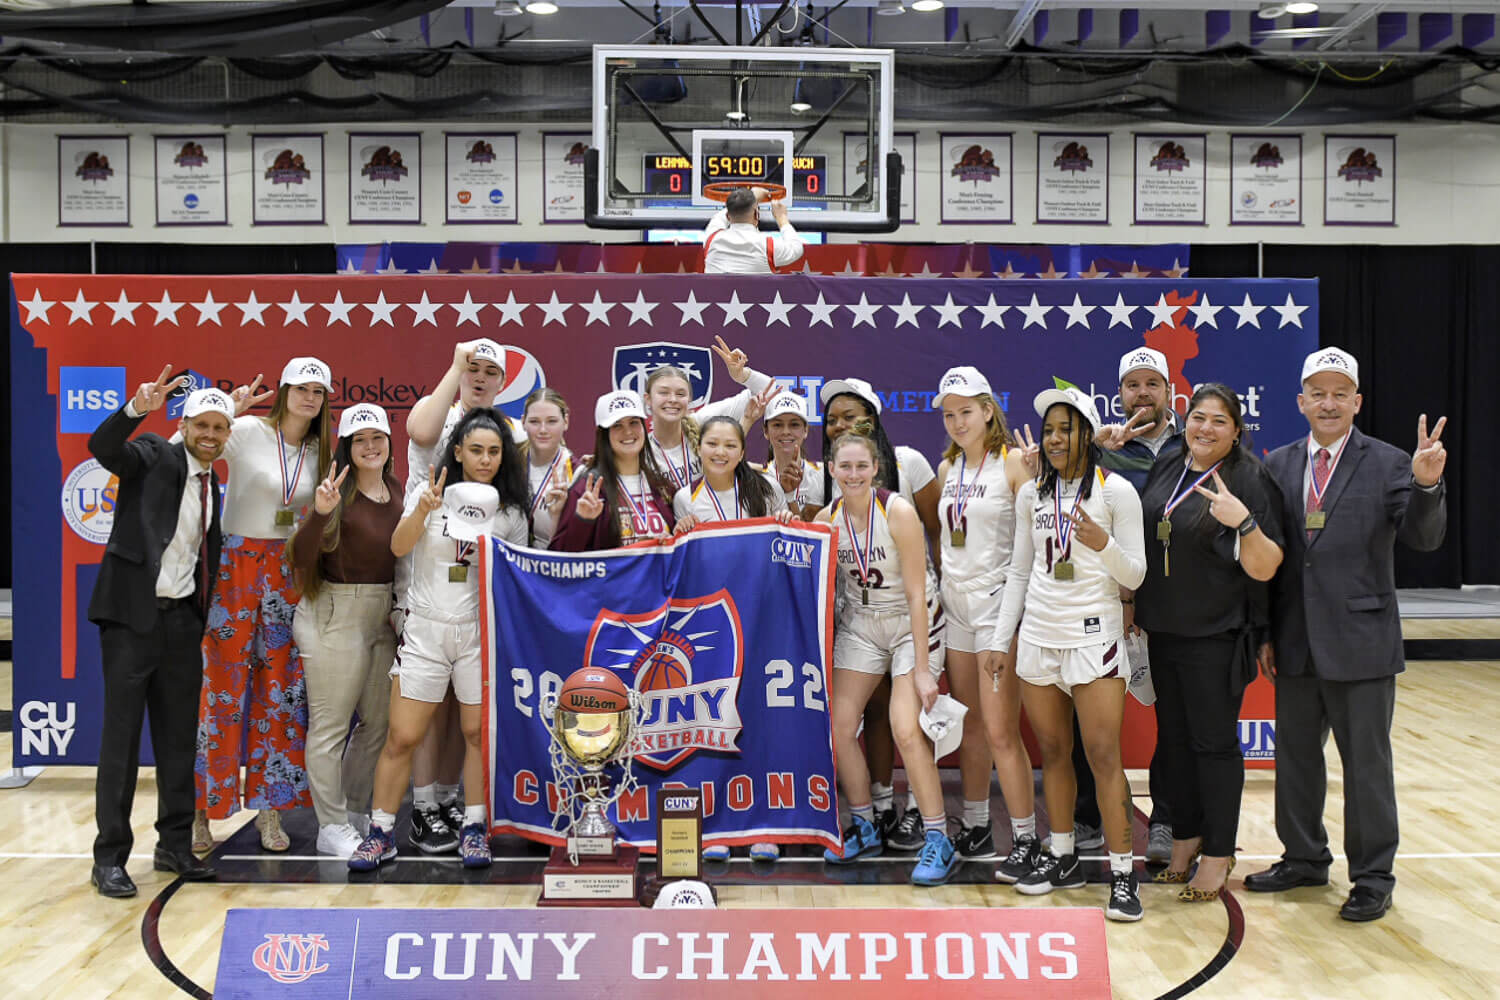 The Brooklyn College women’s basketball team won their first NCAA Tournament game in program history with a first-round victory over Emmanuel College (Massachusetts), 70-57. The Bulldogs ended their season as CUNYAC Champions with a 22-4 overall record.